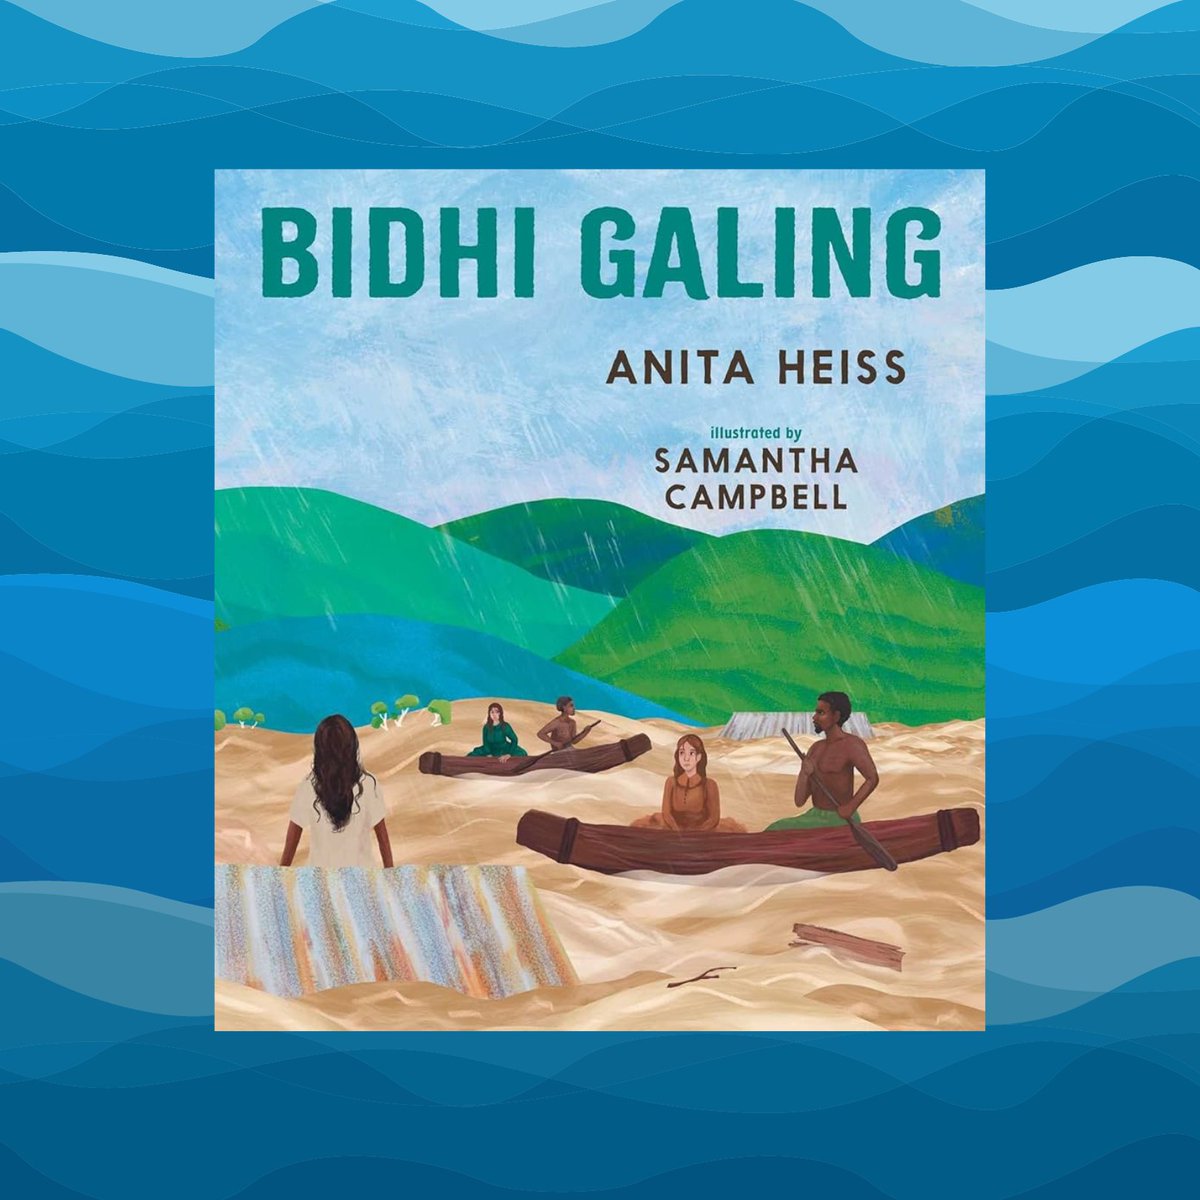 Bidhi Galing by @AnitaHeiss & Samantha Campbell helenedwardswrites.com/bidhi-galing-b… This is a beautiful book with an important message. If only we would listen to those who have thousands & thousands of years knowledge about the land & the ways in which we can live in harmony with nature.